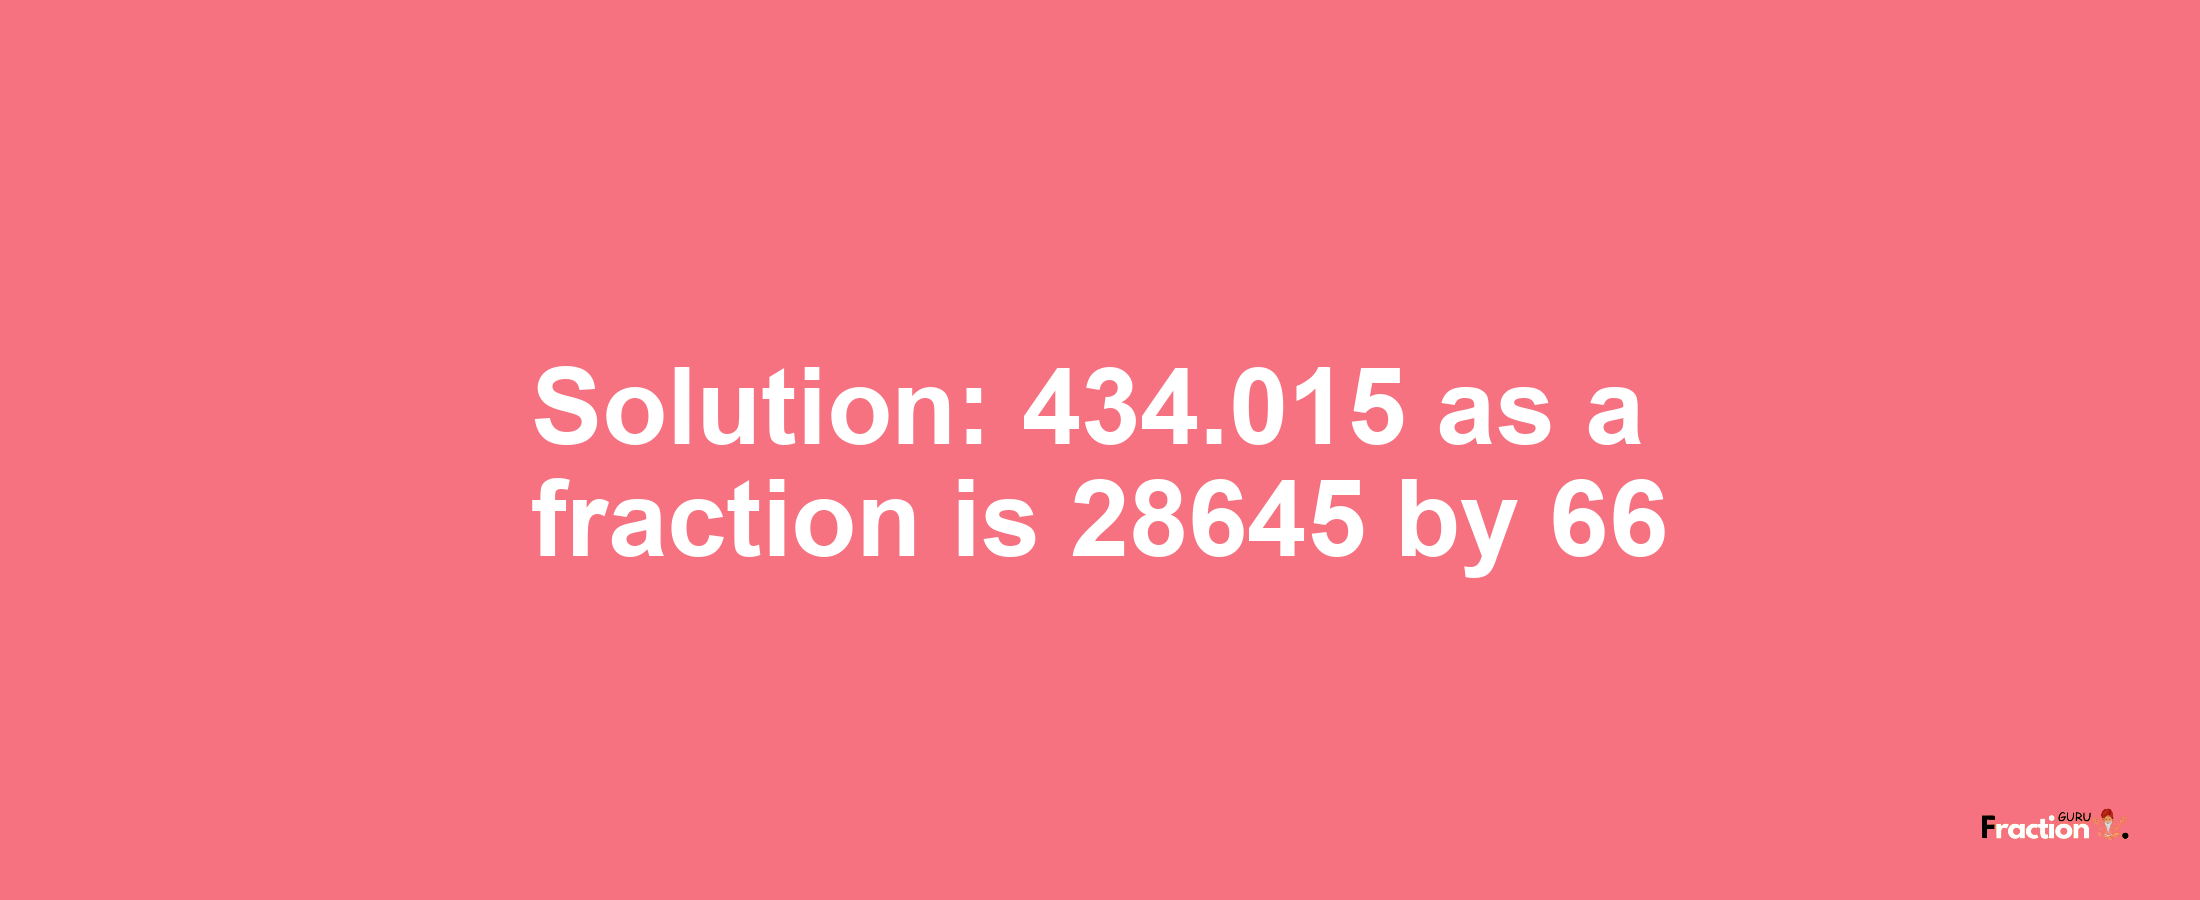 Solution:434.015 as a fraction is 28645/66